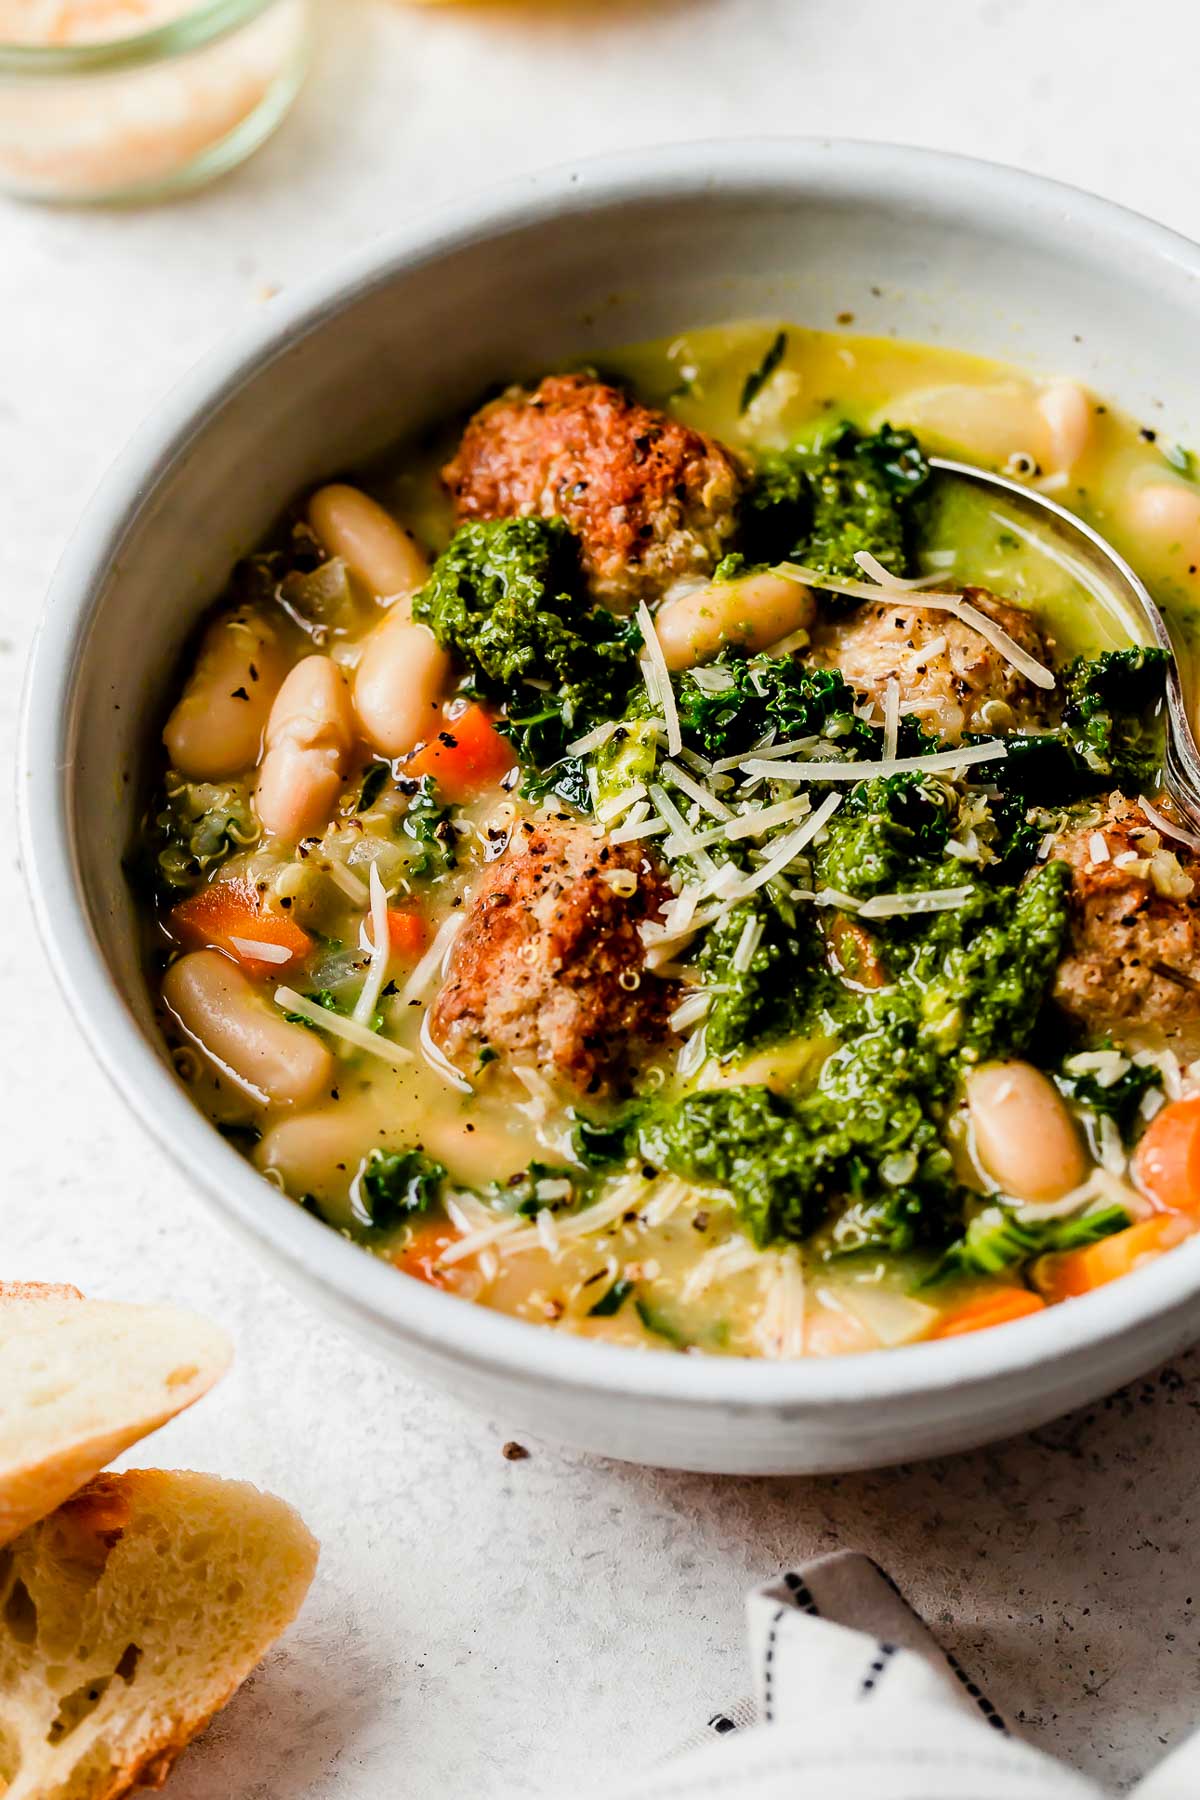 A side angle shot of Italian wedding soup with turkey meatballs served in a white bowl that sits atop a creamy white textured surface. The soup has been garnished with dollops of fresh pesto and shredded parmesan cheese. A spoon rests inside of the bowl and the bowl is surrounded by a white and black striped linen napkin, a few pieces of crusty bread, and a small glass jar filled with shredded parmesan cheese.